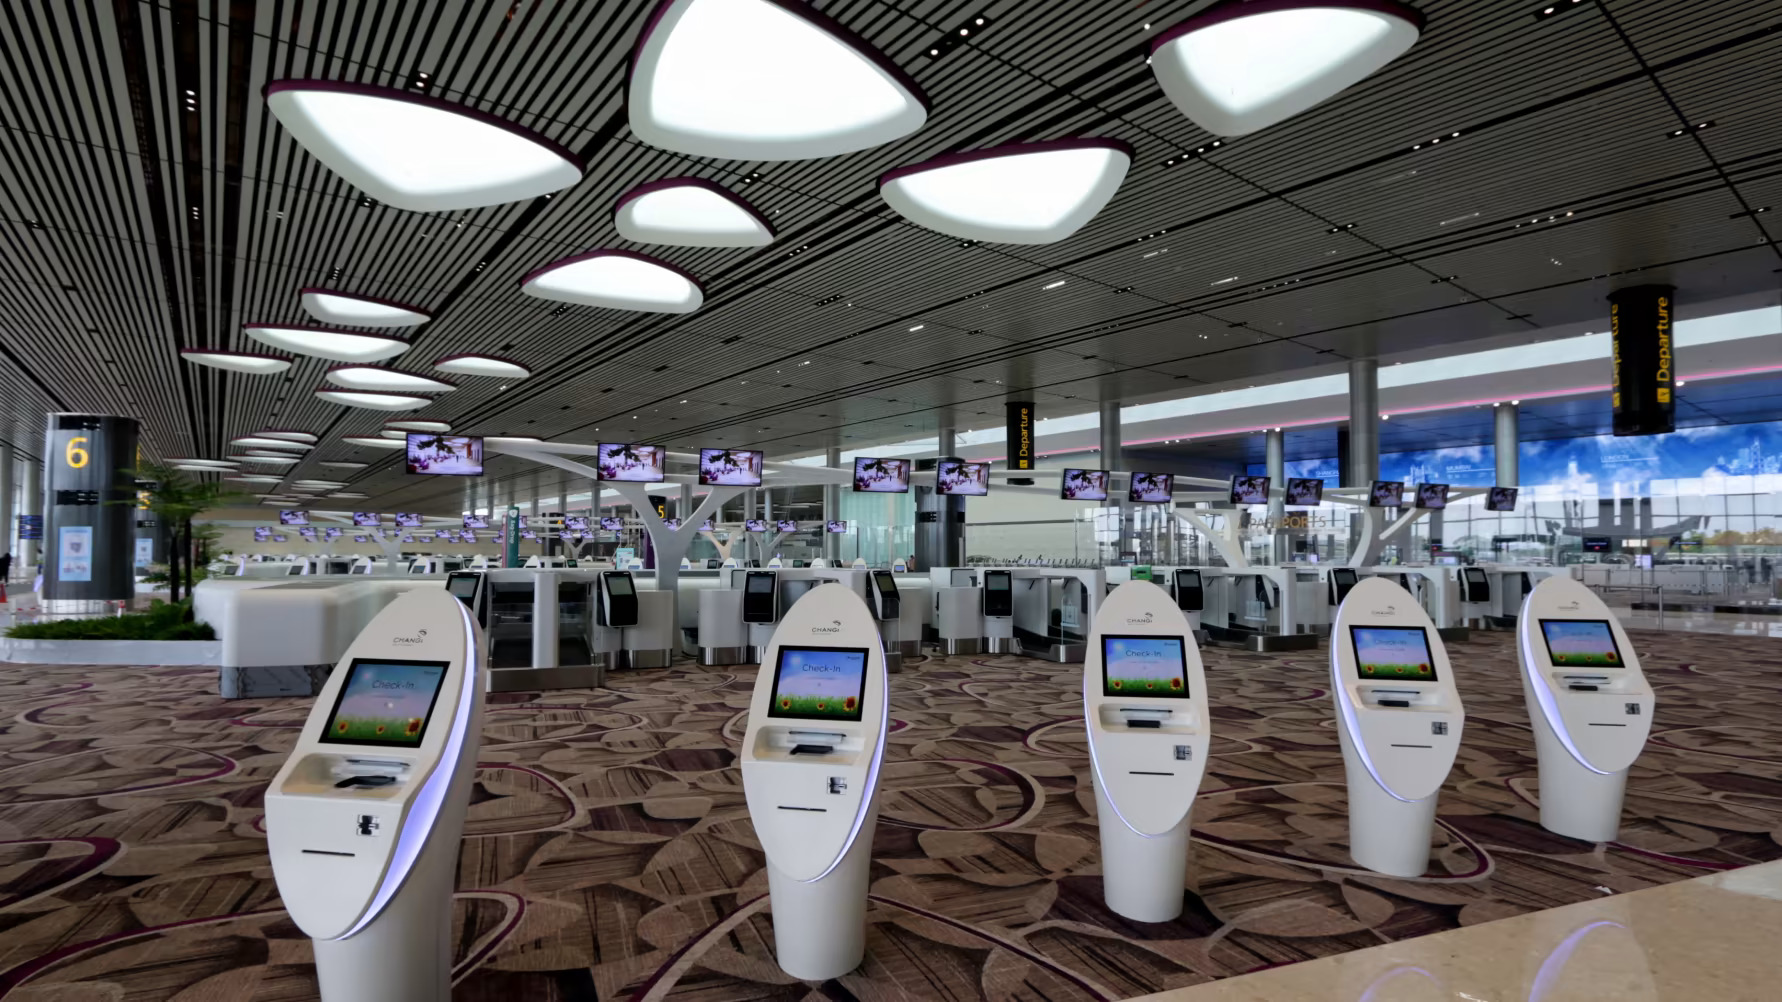 Singapore' Changi airport to reopen Terminal 2 ahead of